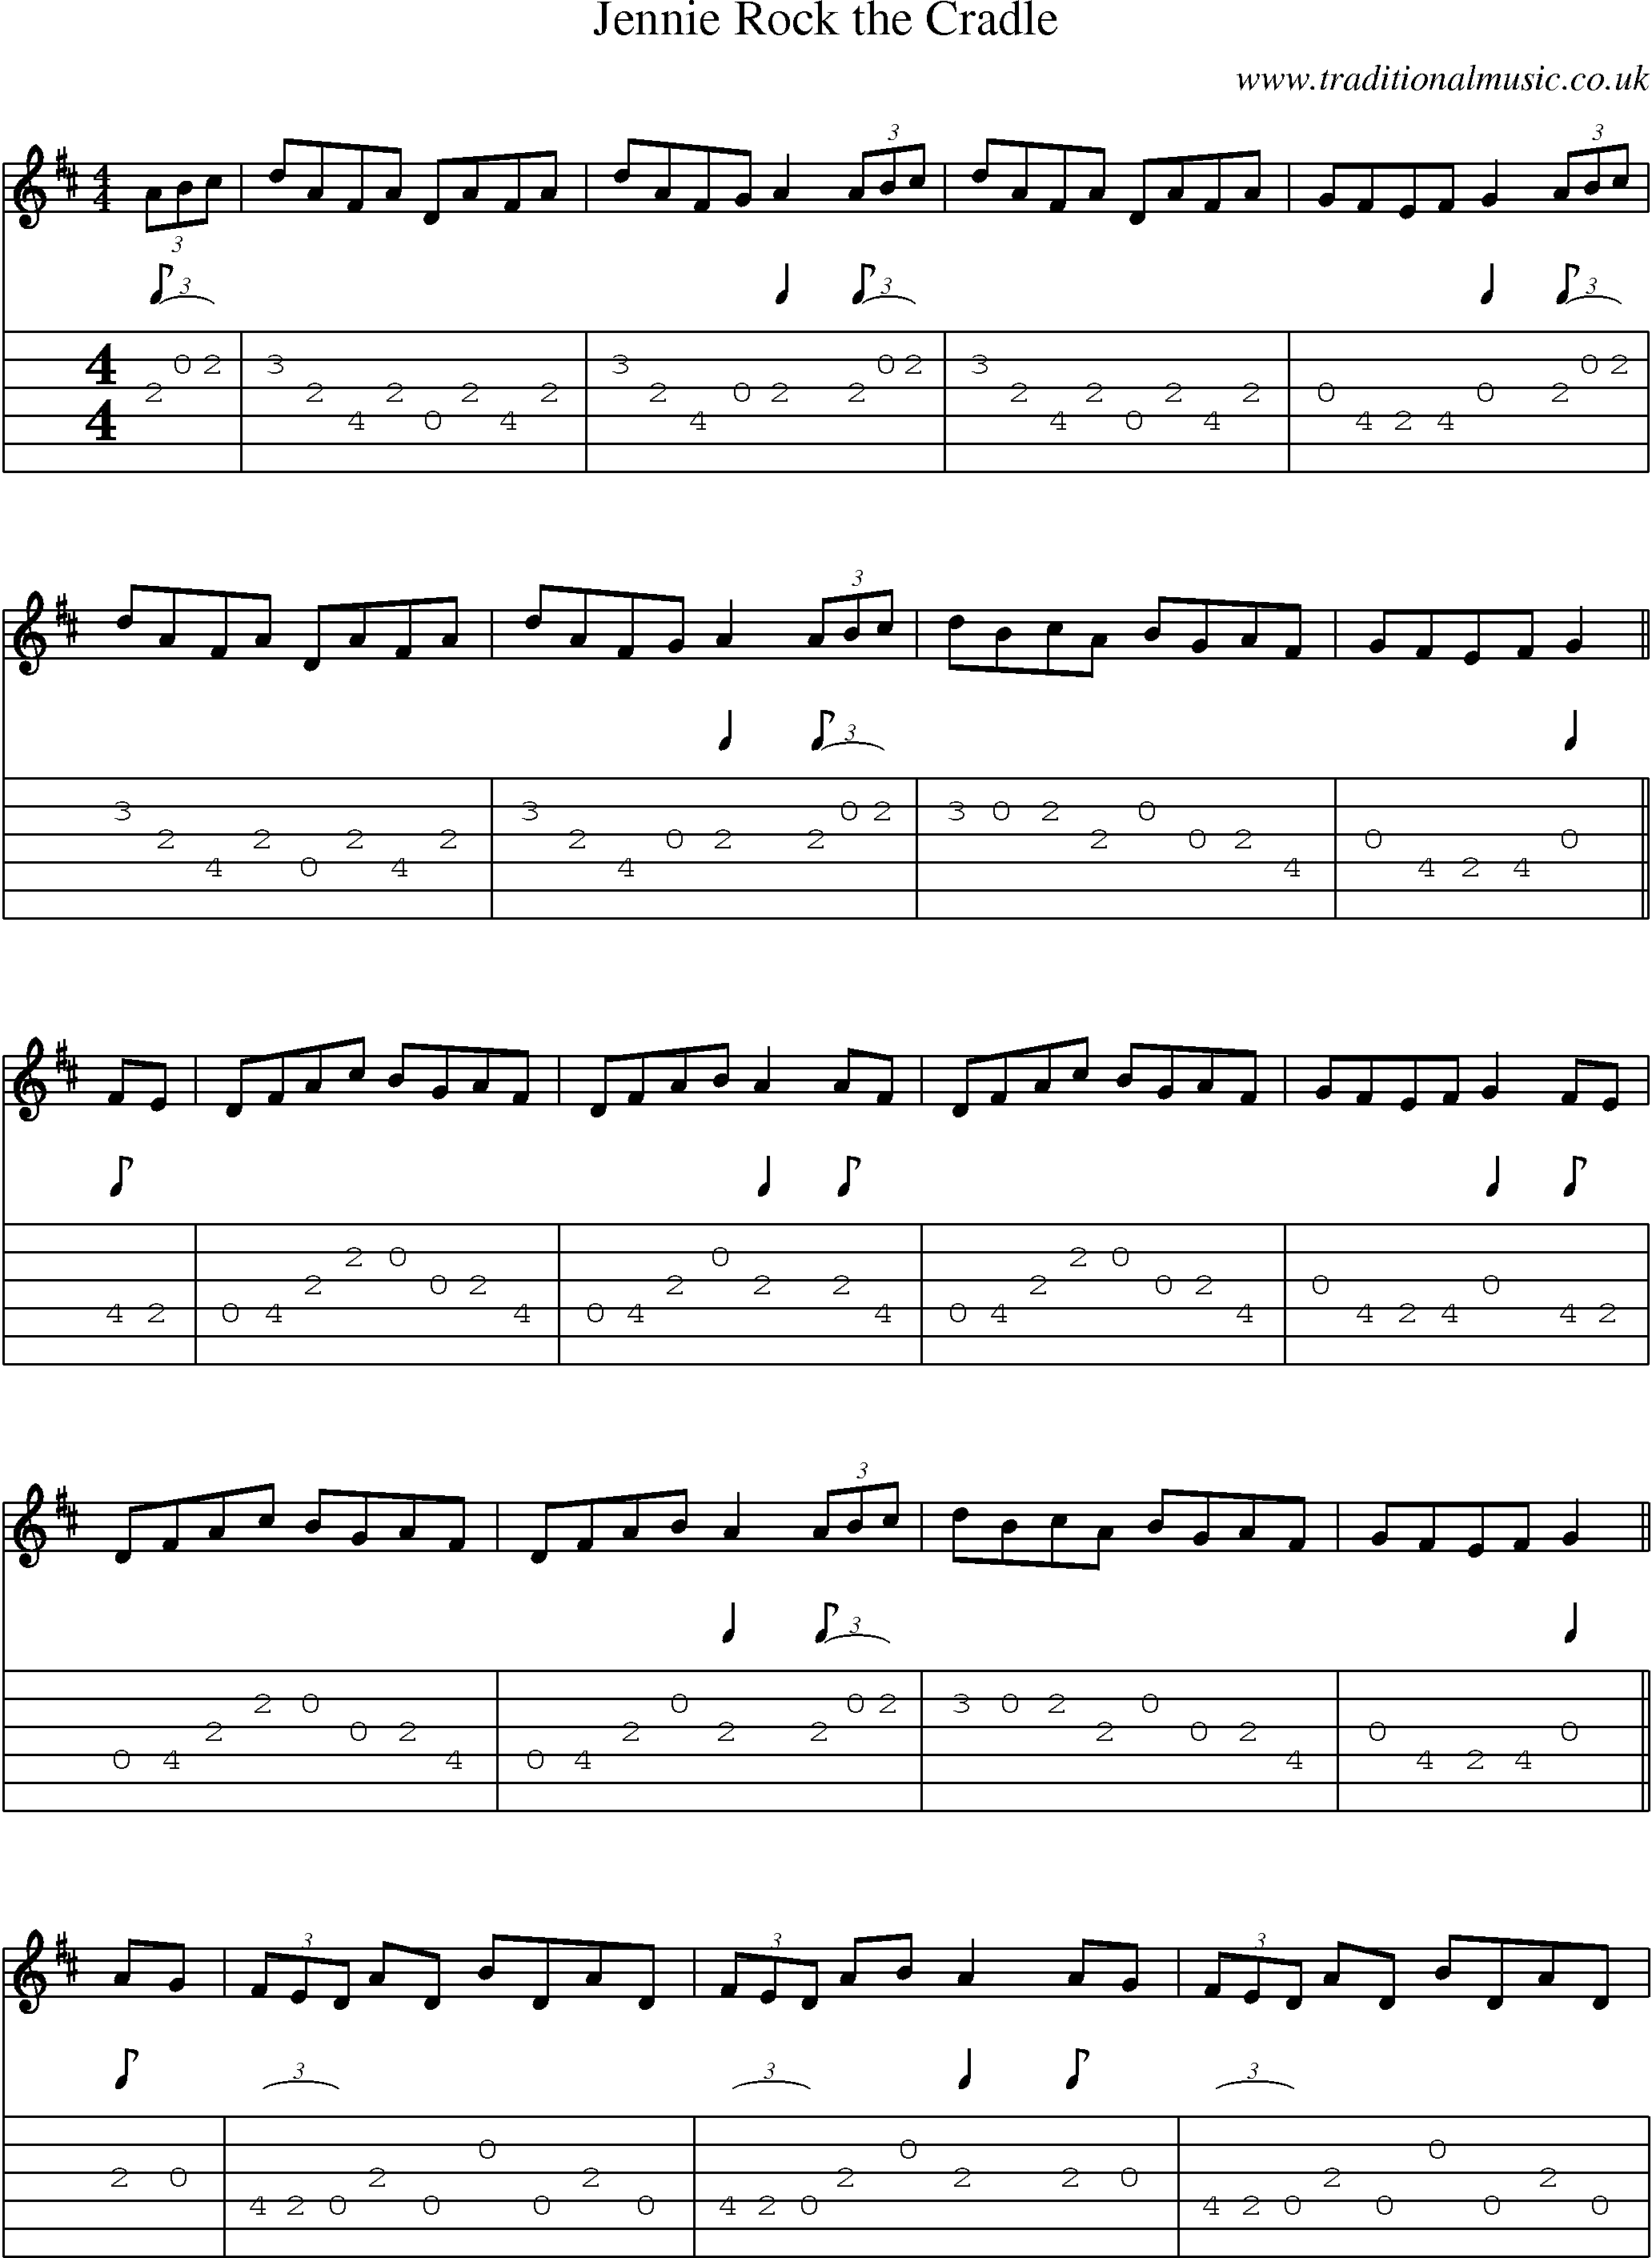 Music Score and Guitar Tabs for Jennie Rock Cradle